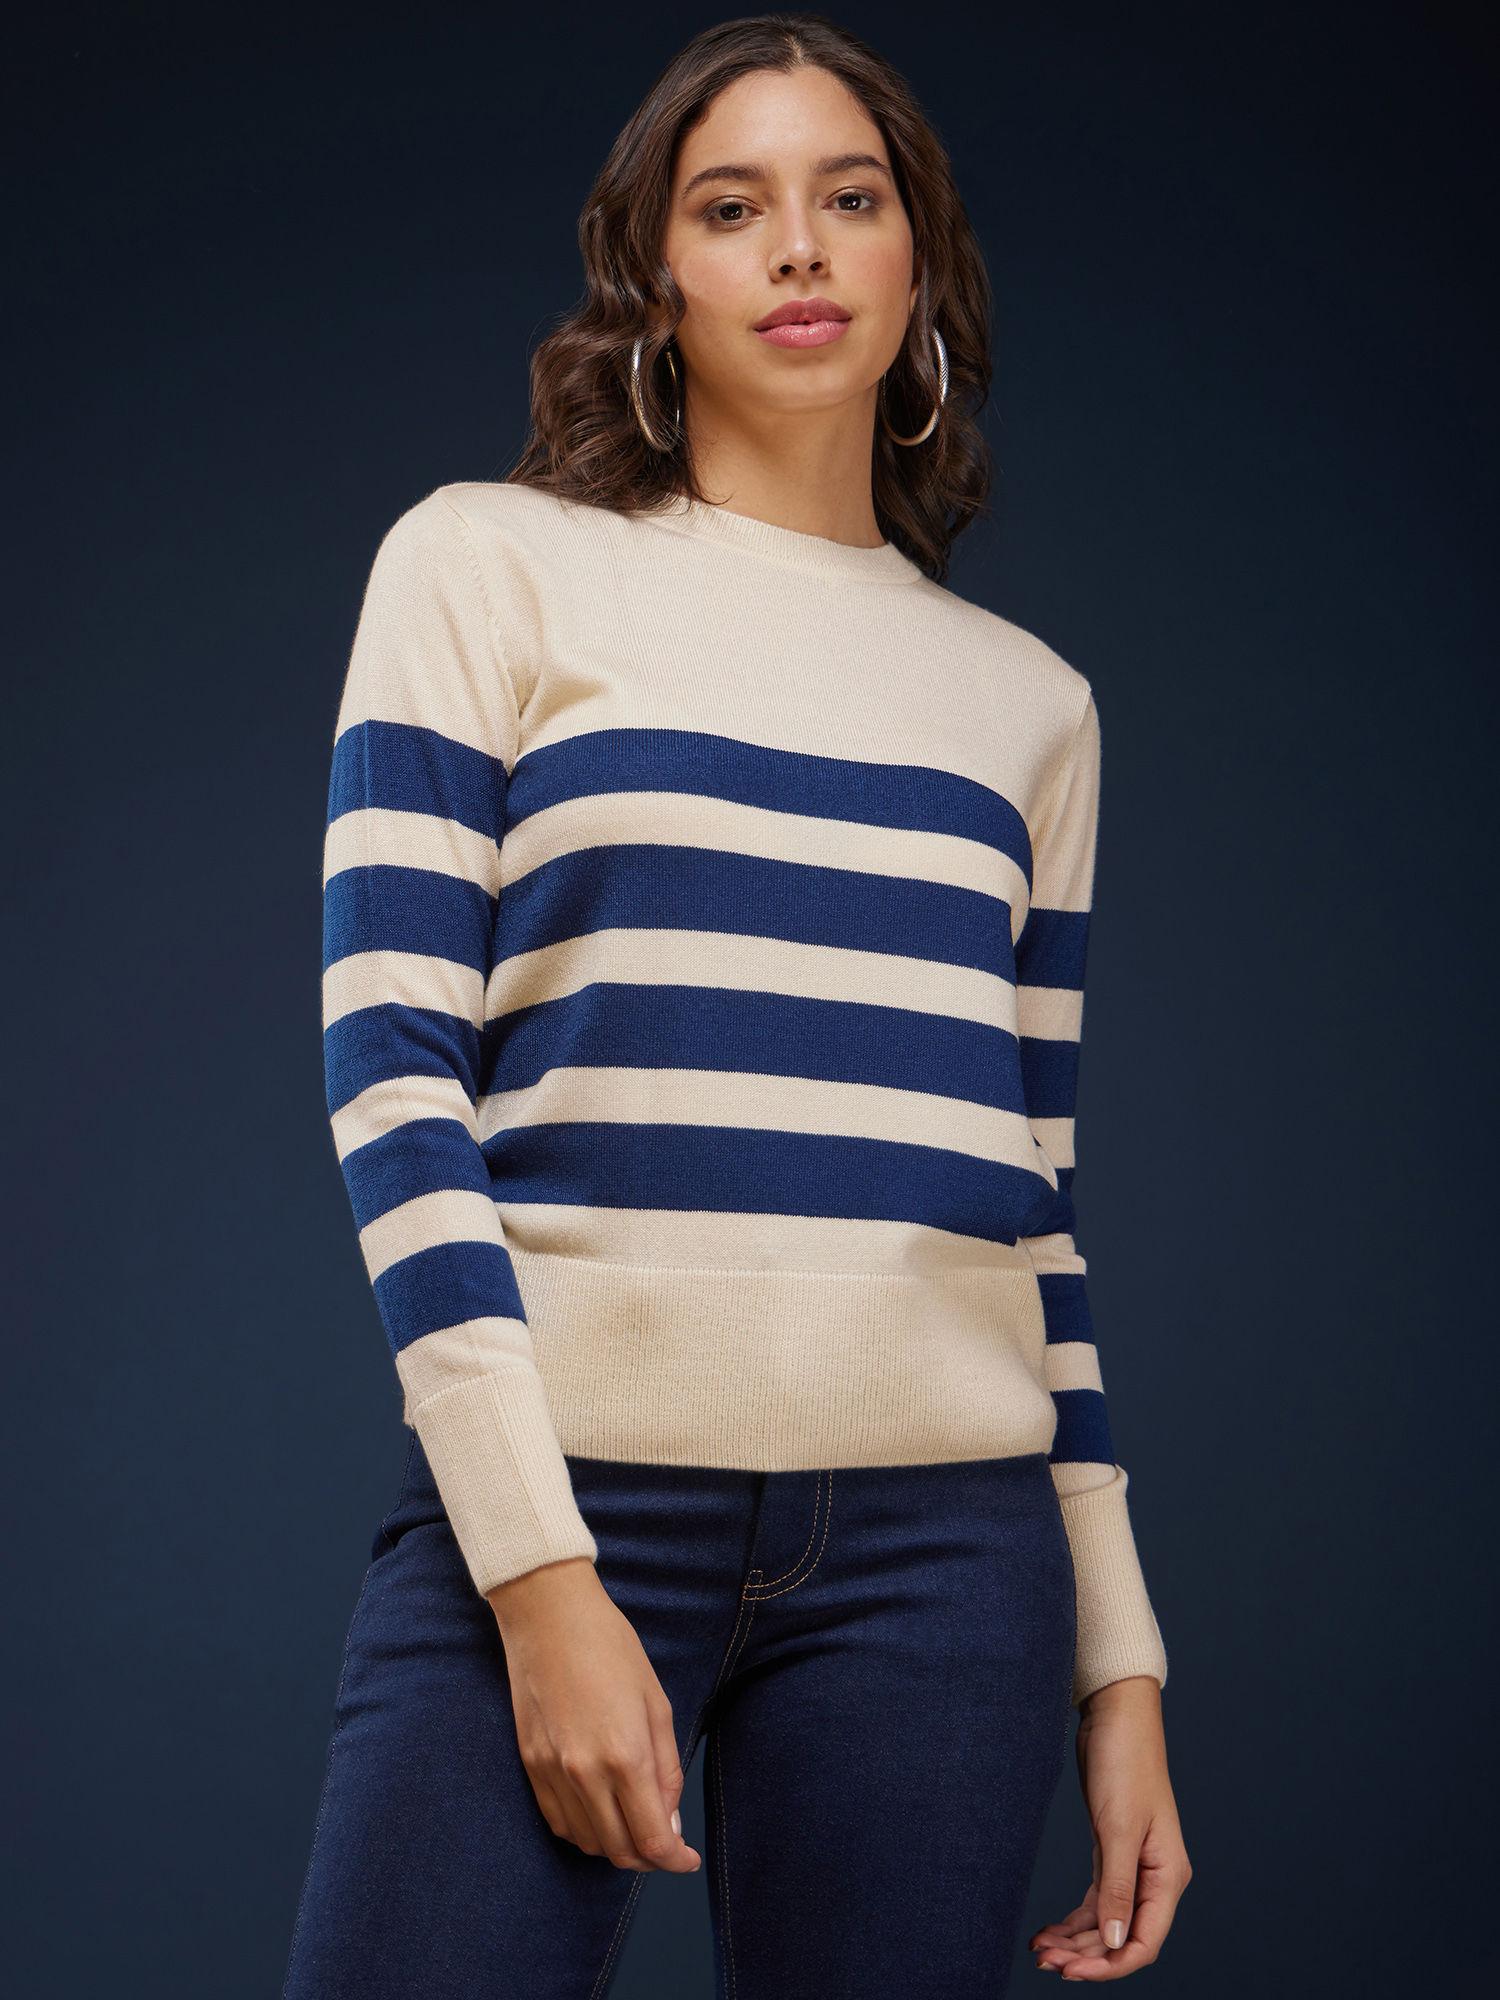 livsoft stripe detail sweater - off white and navy blue